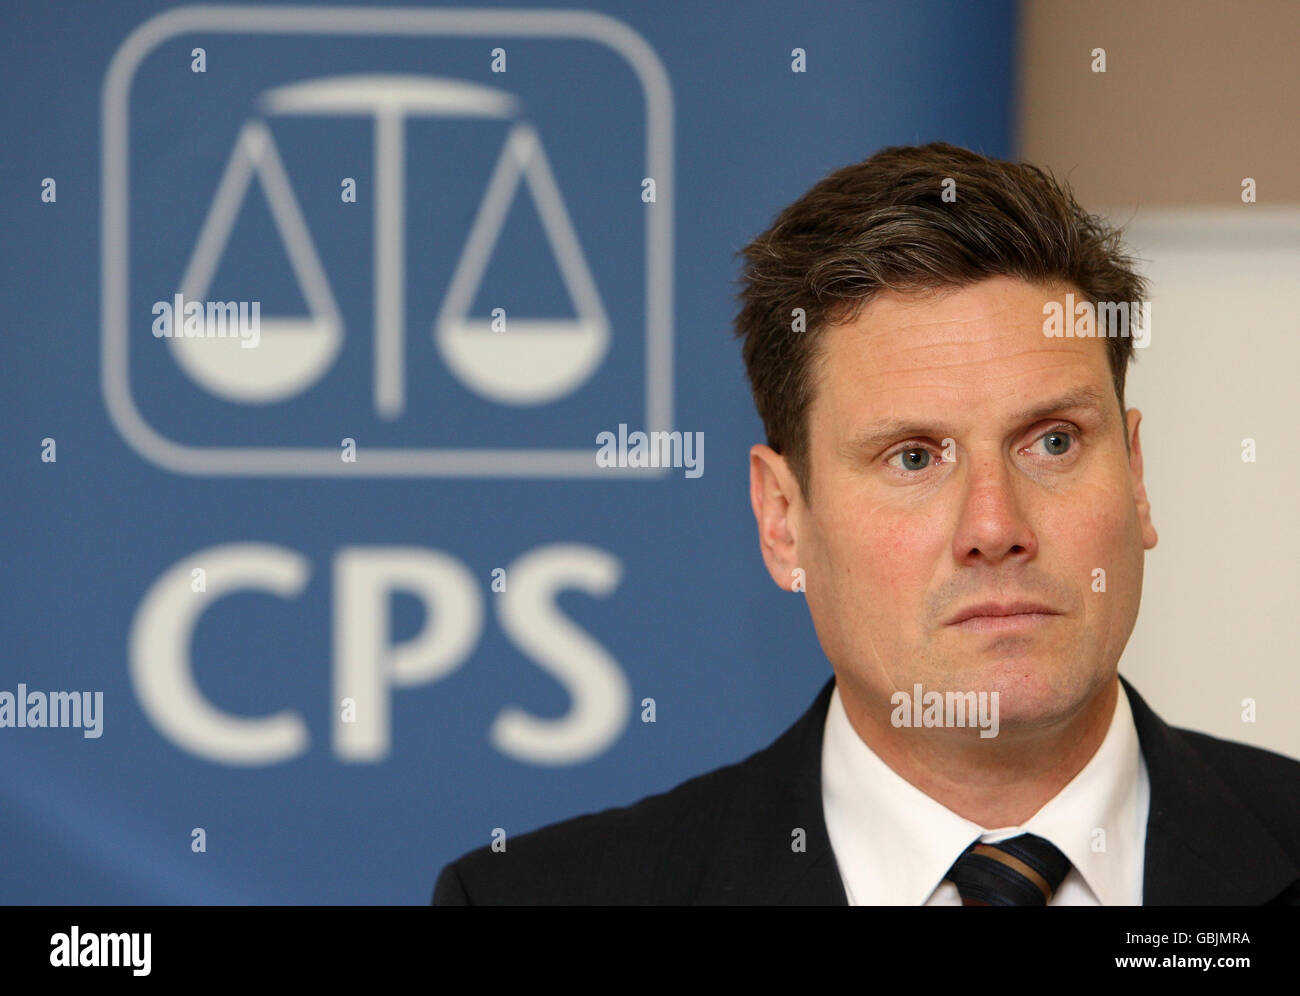 Keir Starmer QC, Director of Public Prosecutions at the Crown Prosecution Service, reads a statement at the CPS headquarters, in central London, in which the CPS announced that they will not prosecute Conservative MP Damian Green. Stock Photo